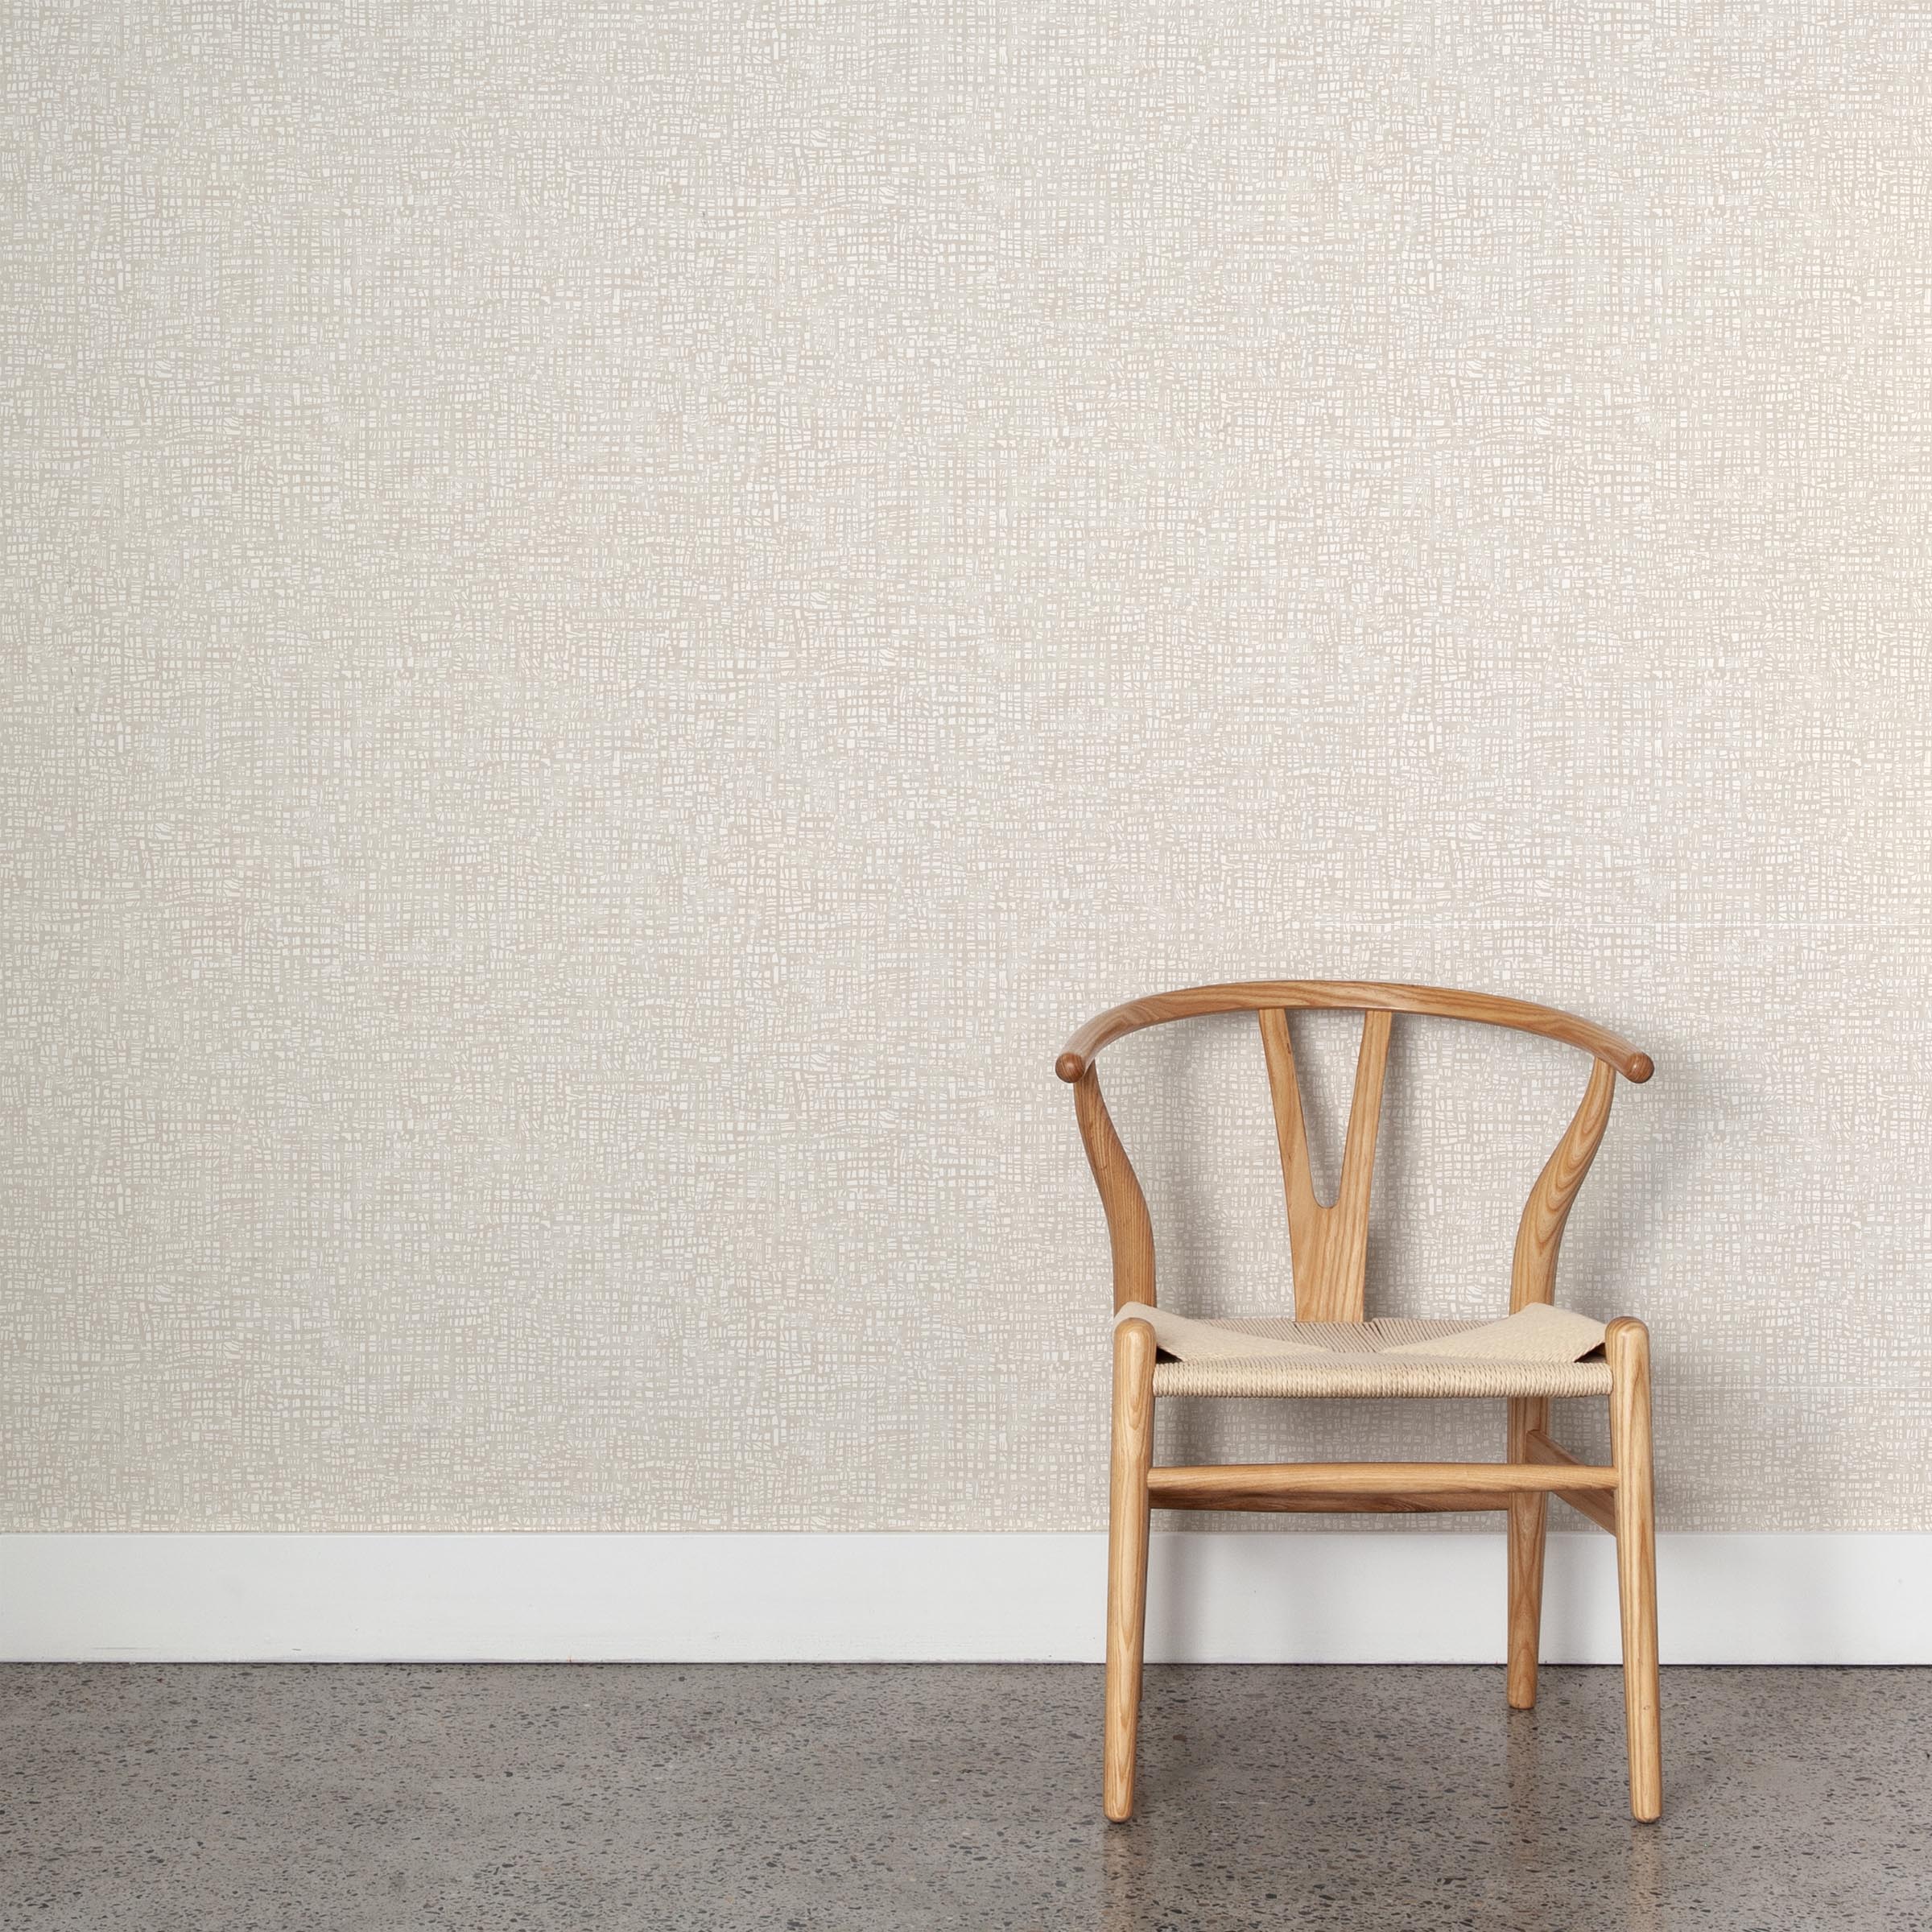 A wooden chair stands in front of a wall papered in a textural wicker pattern in mottled cream on a white field.